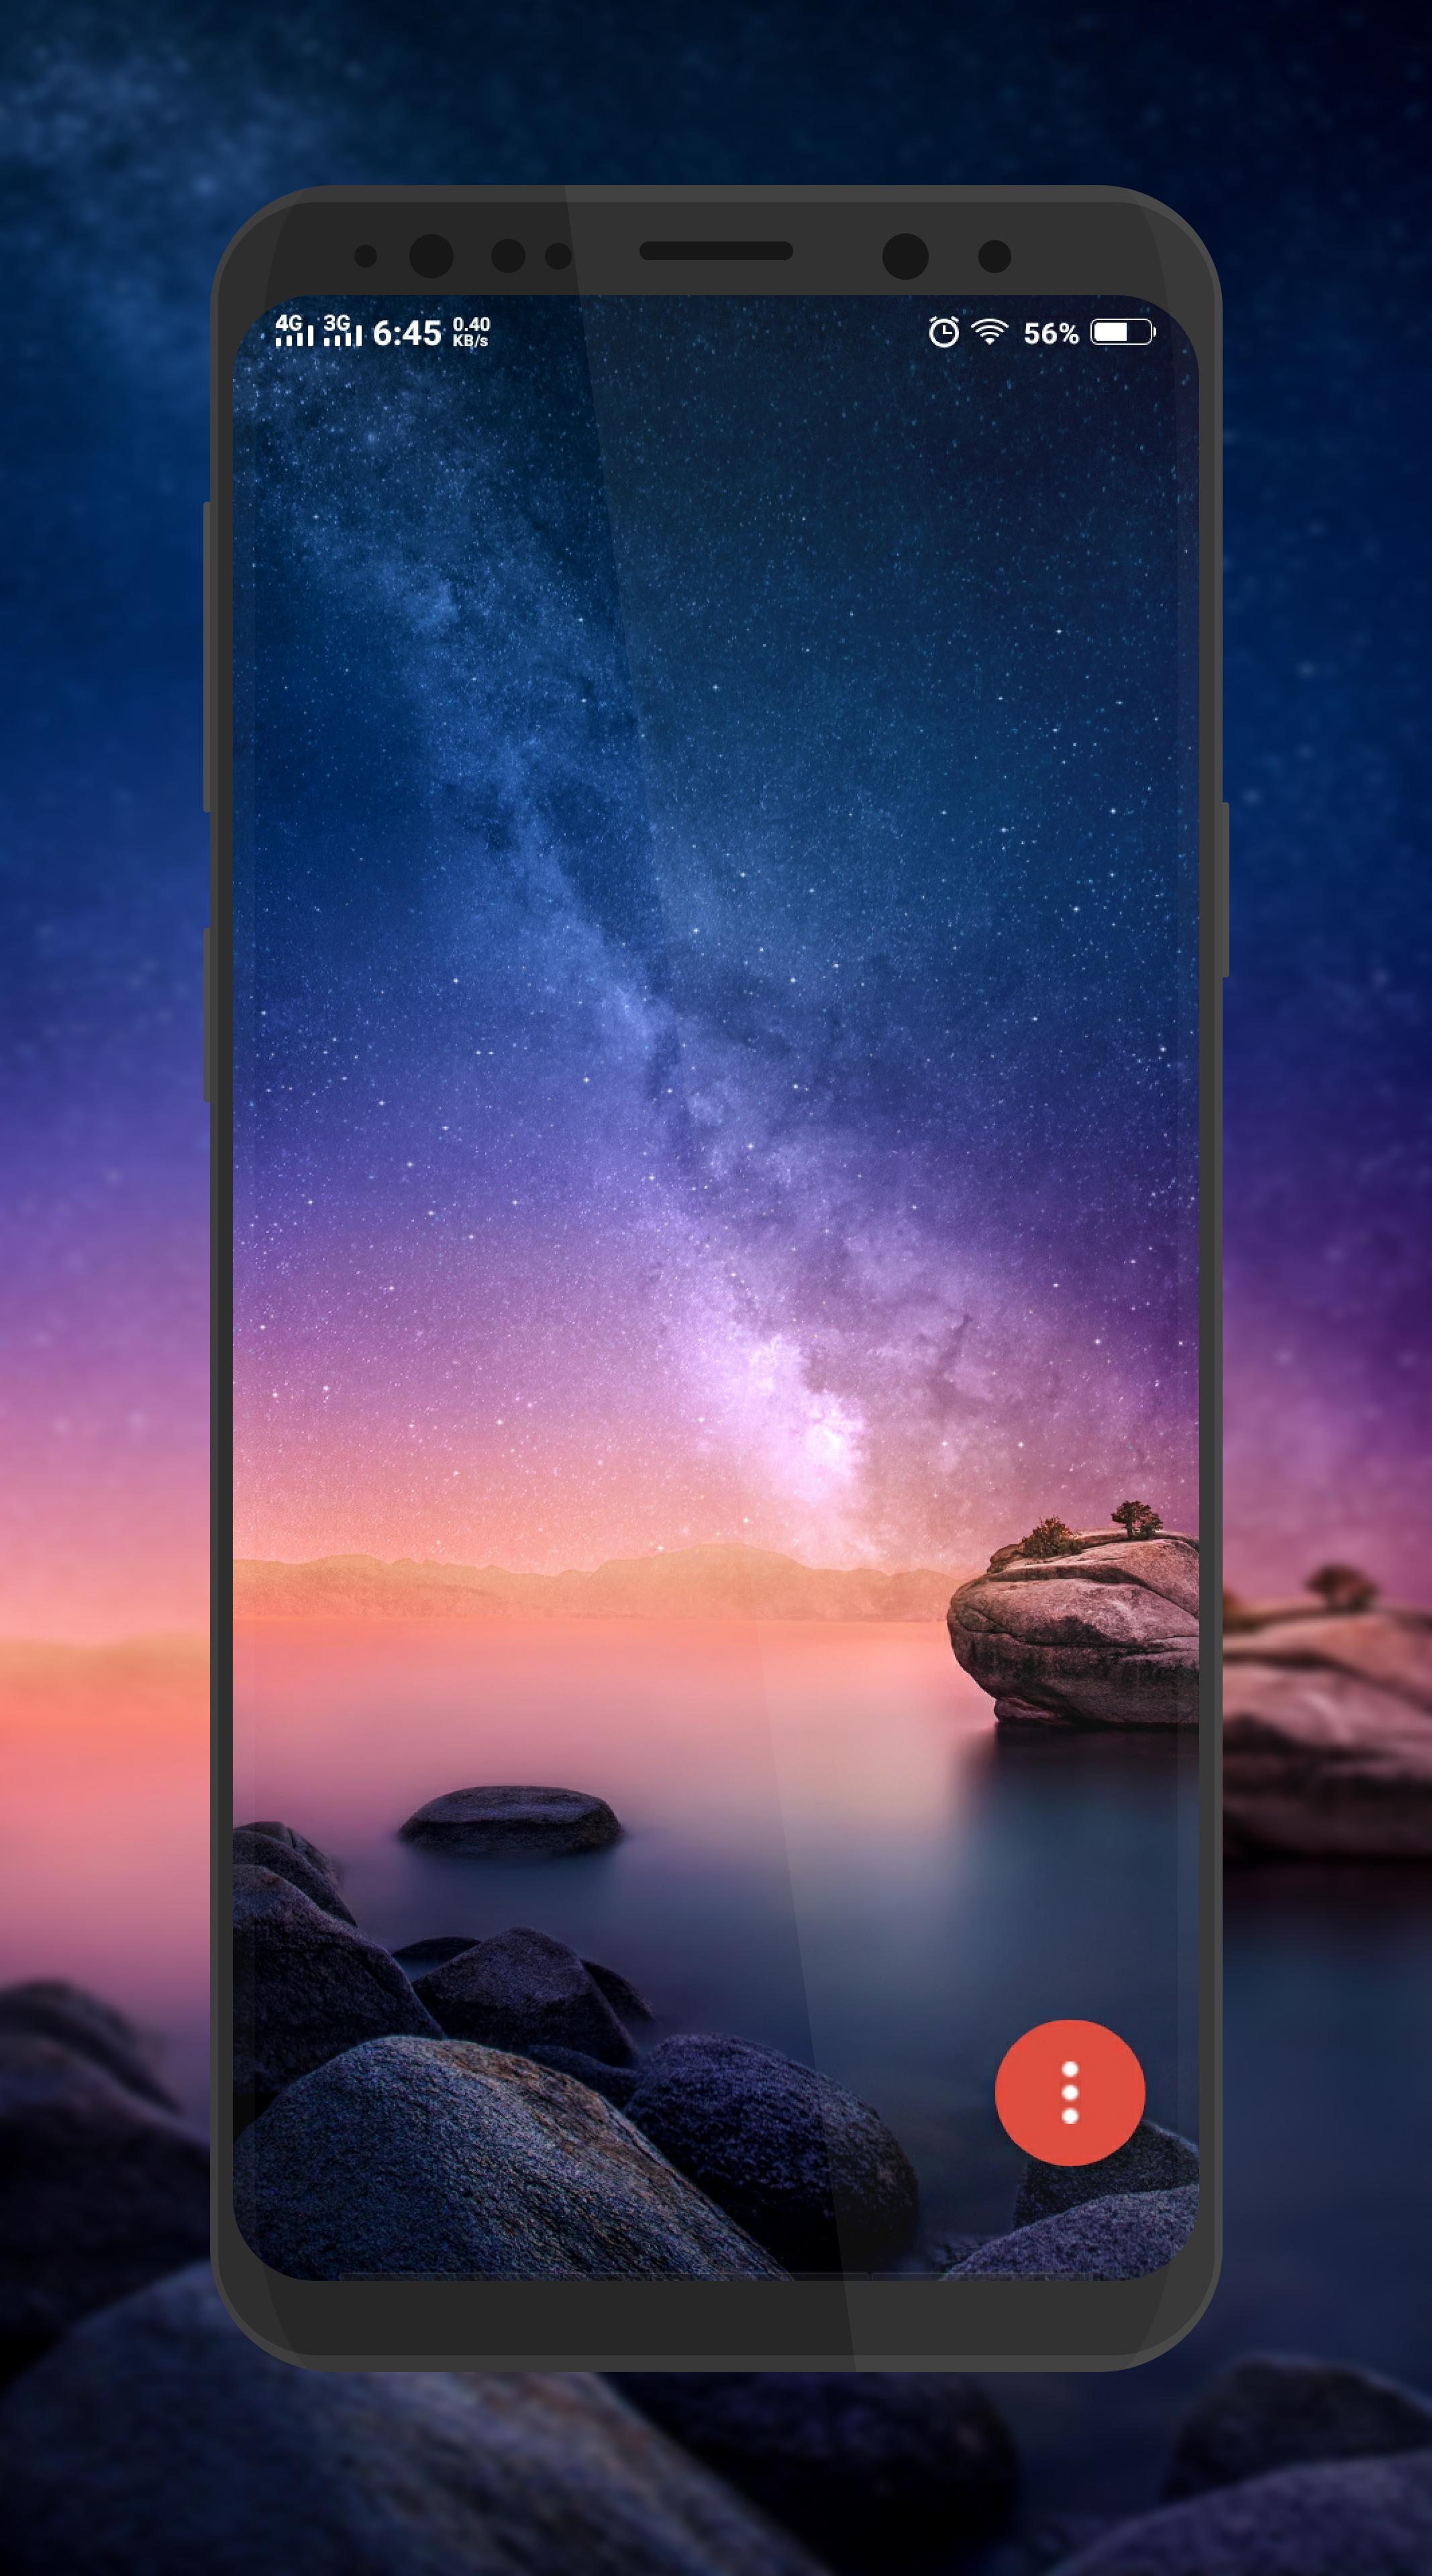 Redmi 6 Pro Mi 8 Wallpapers HD For Android APK Download